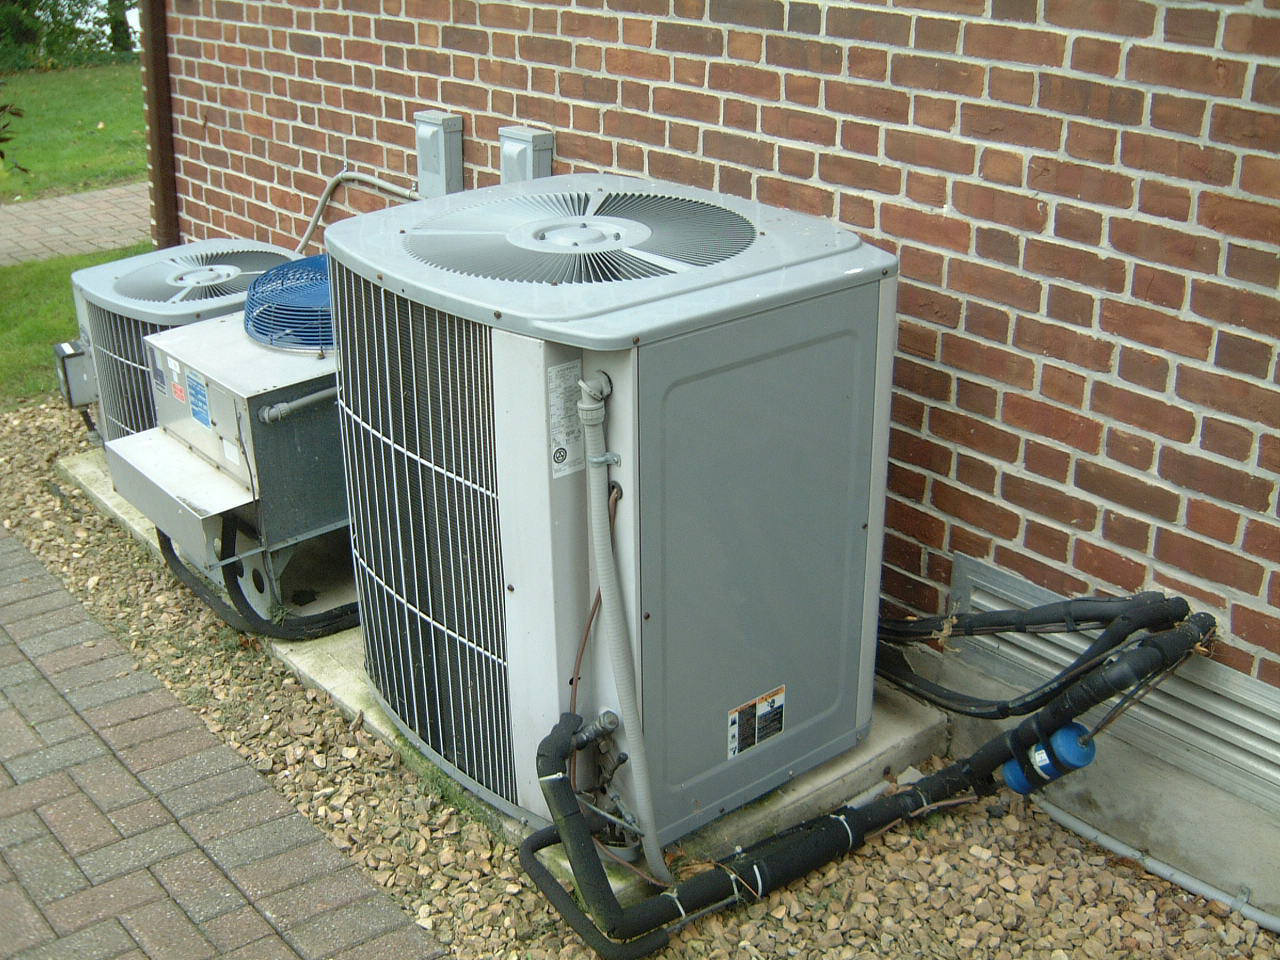 How Often Should I Have My HVAC System Serviced?